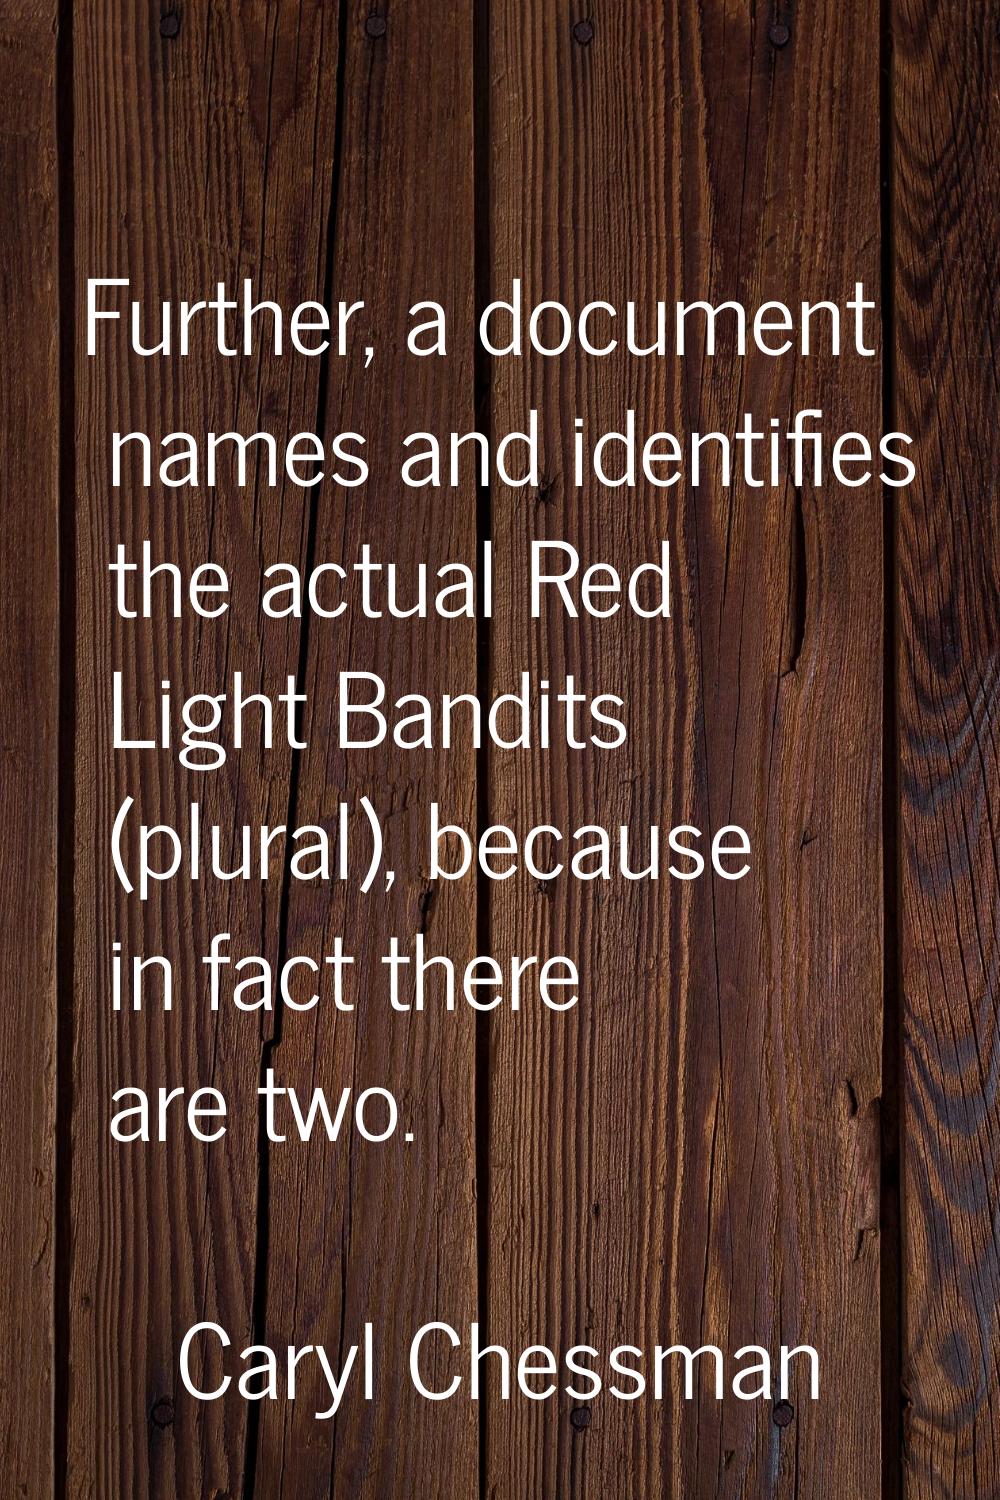 Further, a document names and identifies the actual Red Light Bandits (plural), because in fact the